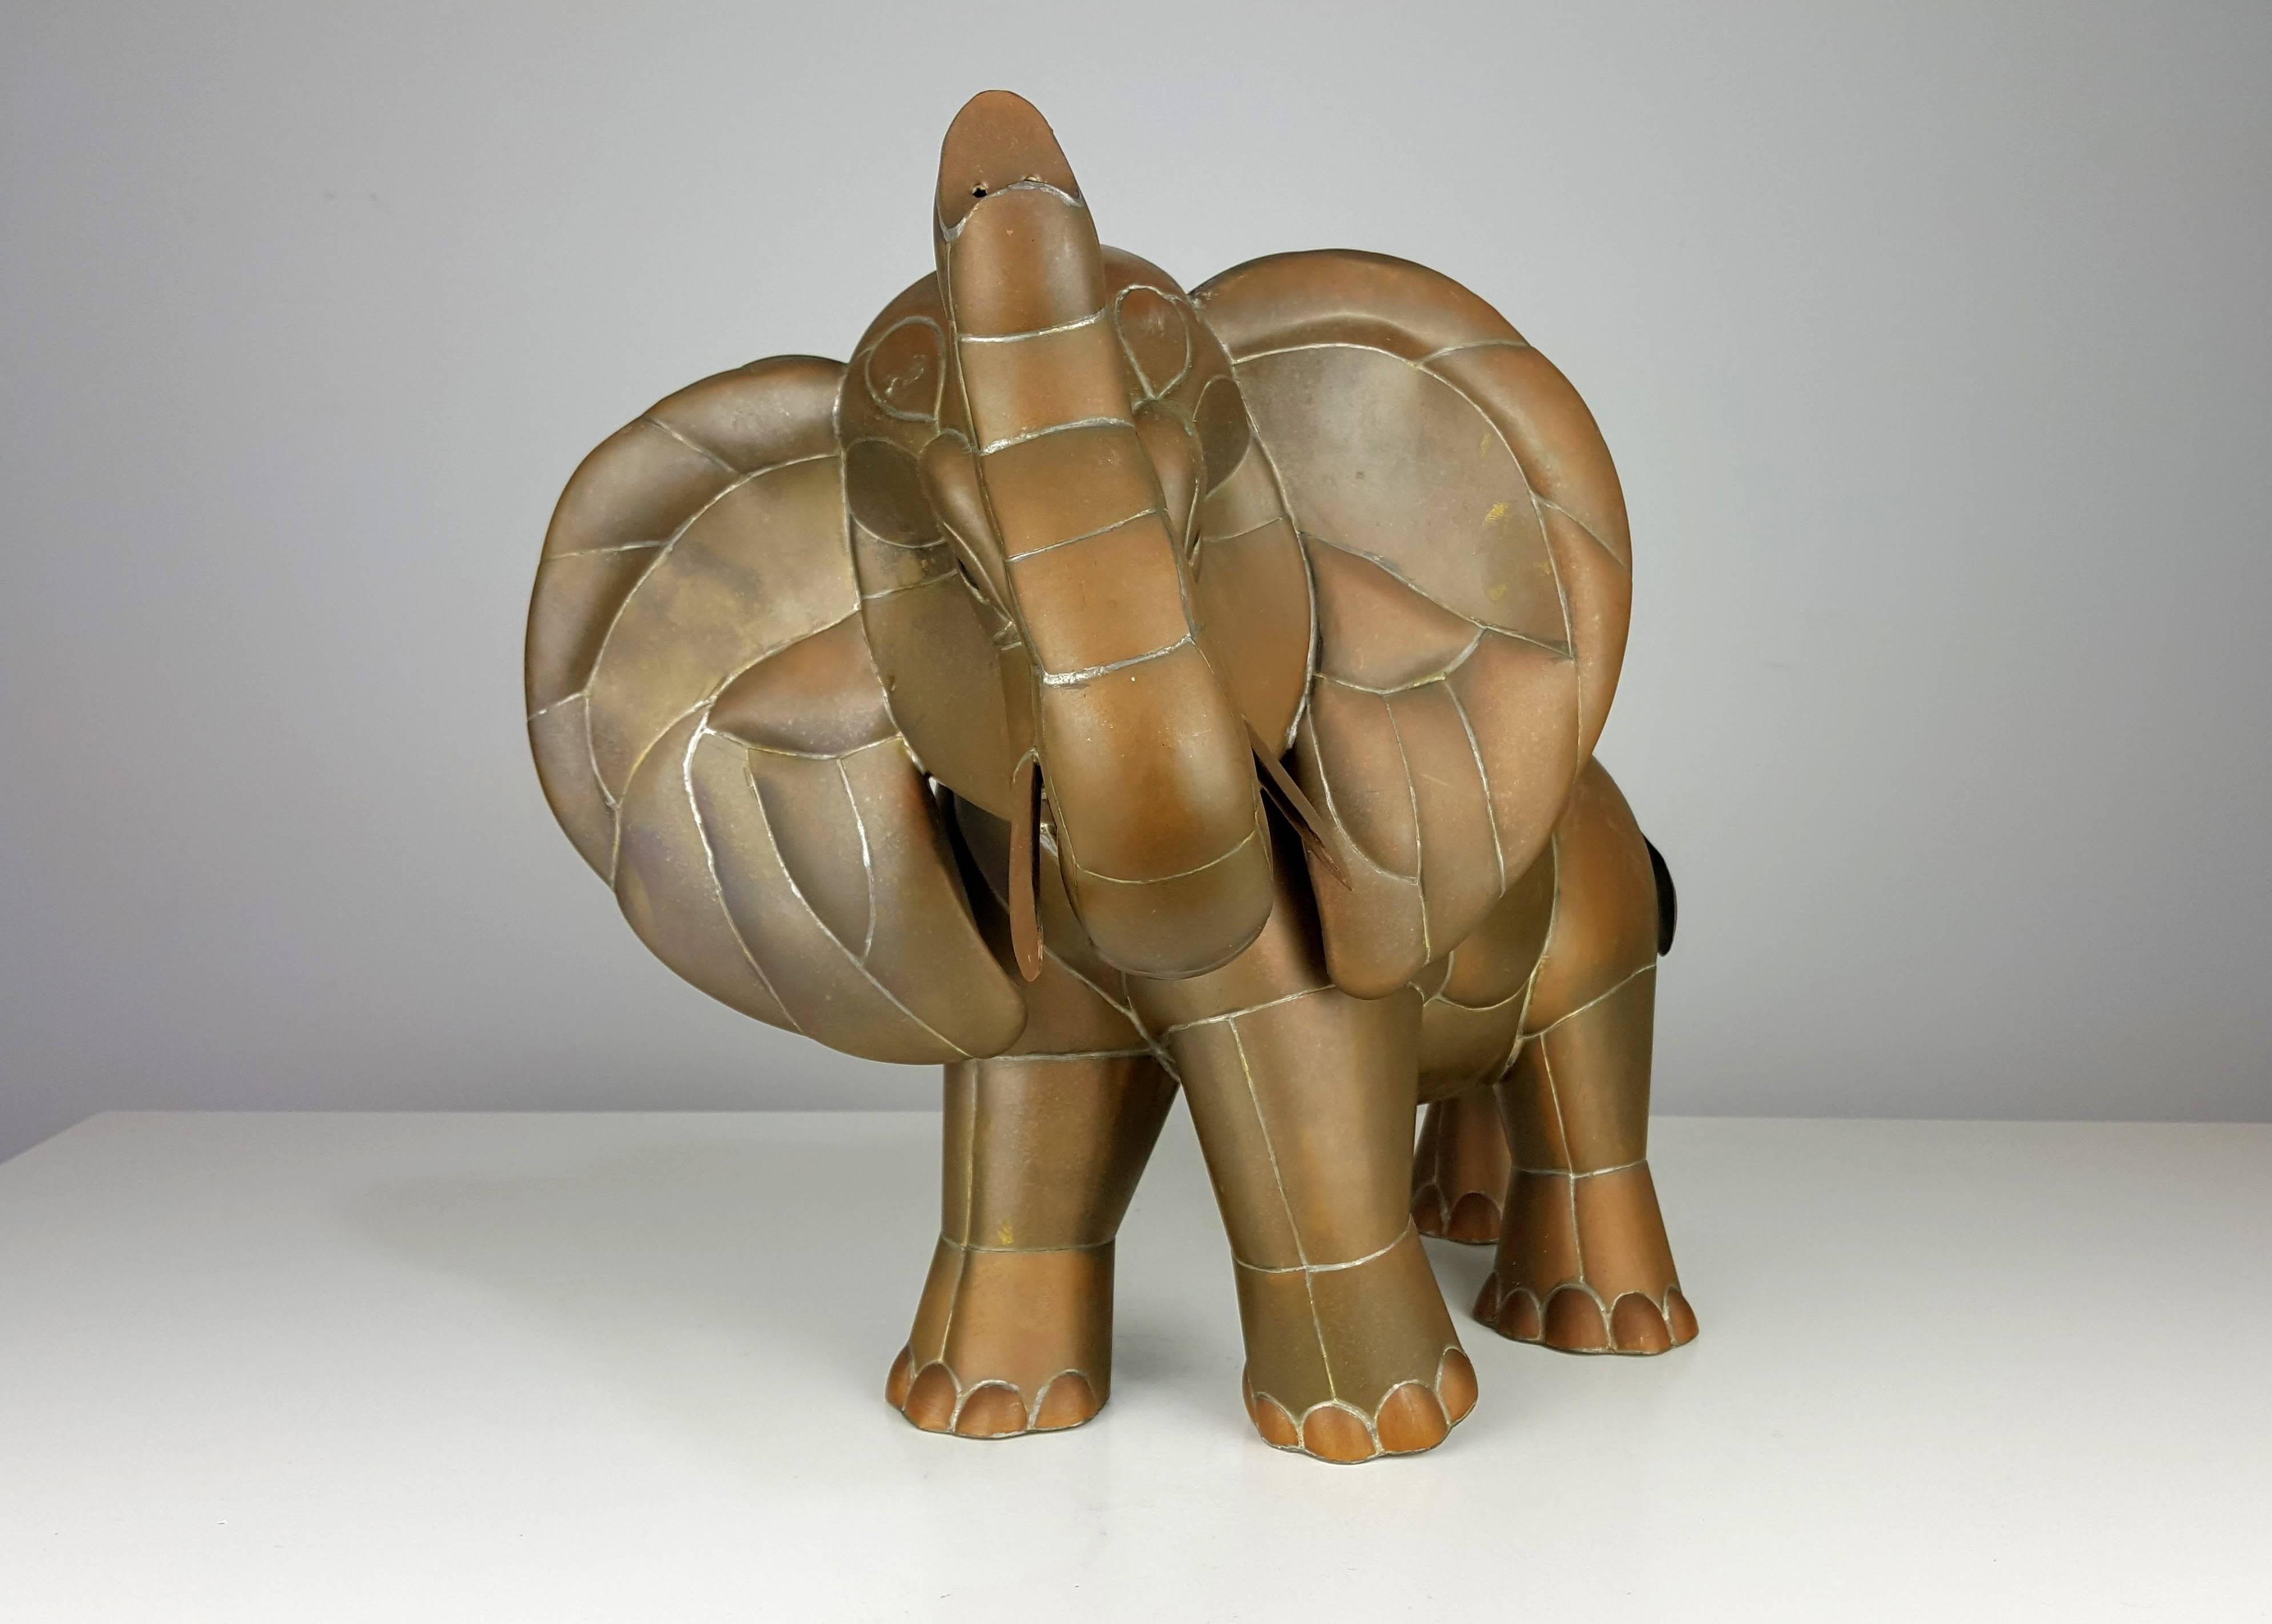 Fancy Brass and Copper Elephant Sculpture by Sergio Bustamante, Mexico 2